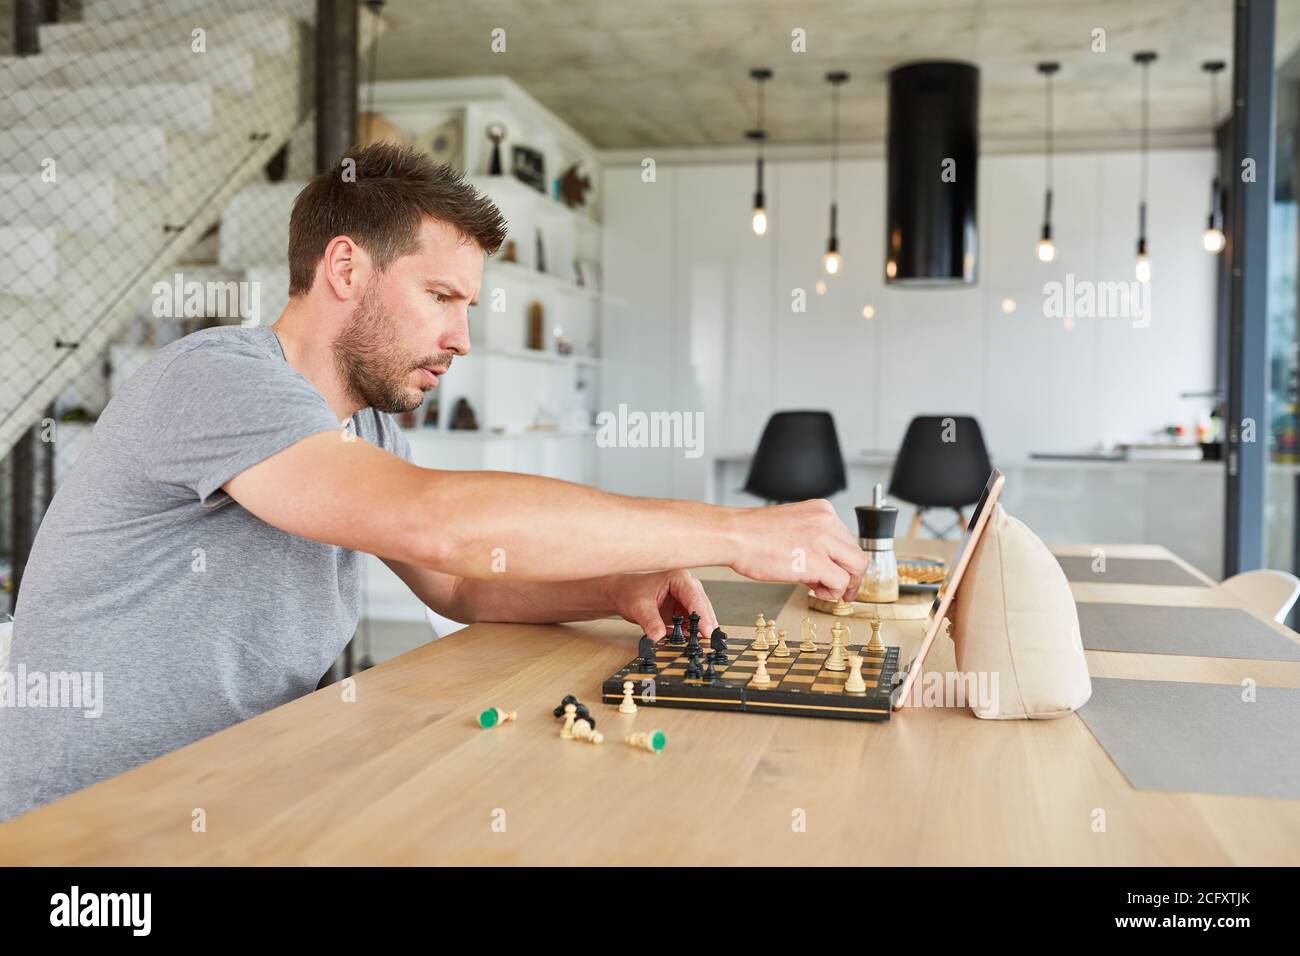 Concentrated man playing chess in video chat online at home in the living room Stock Photo